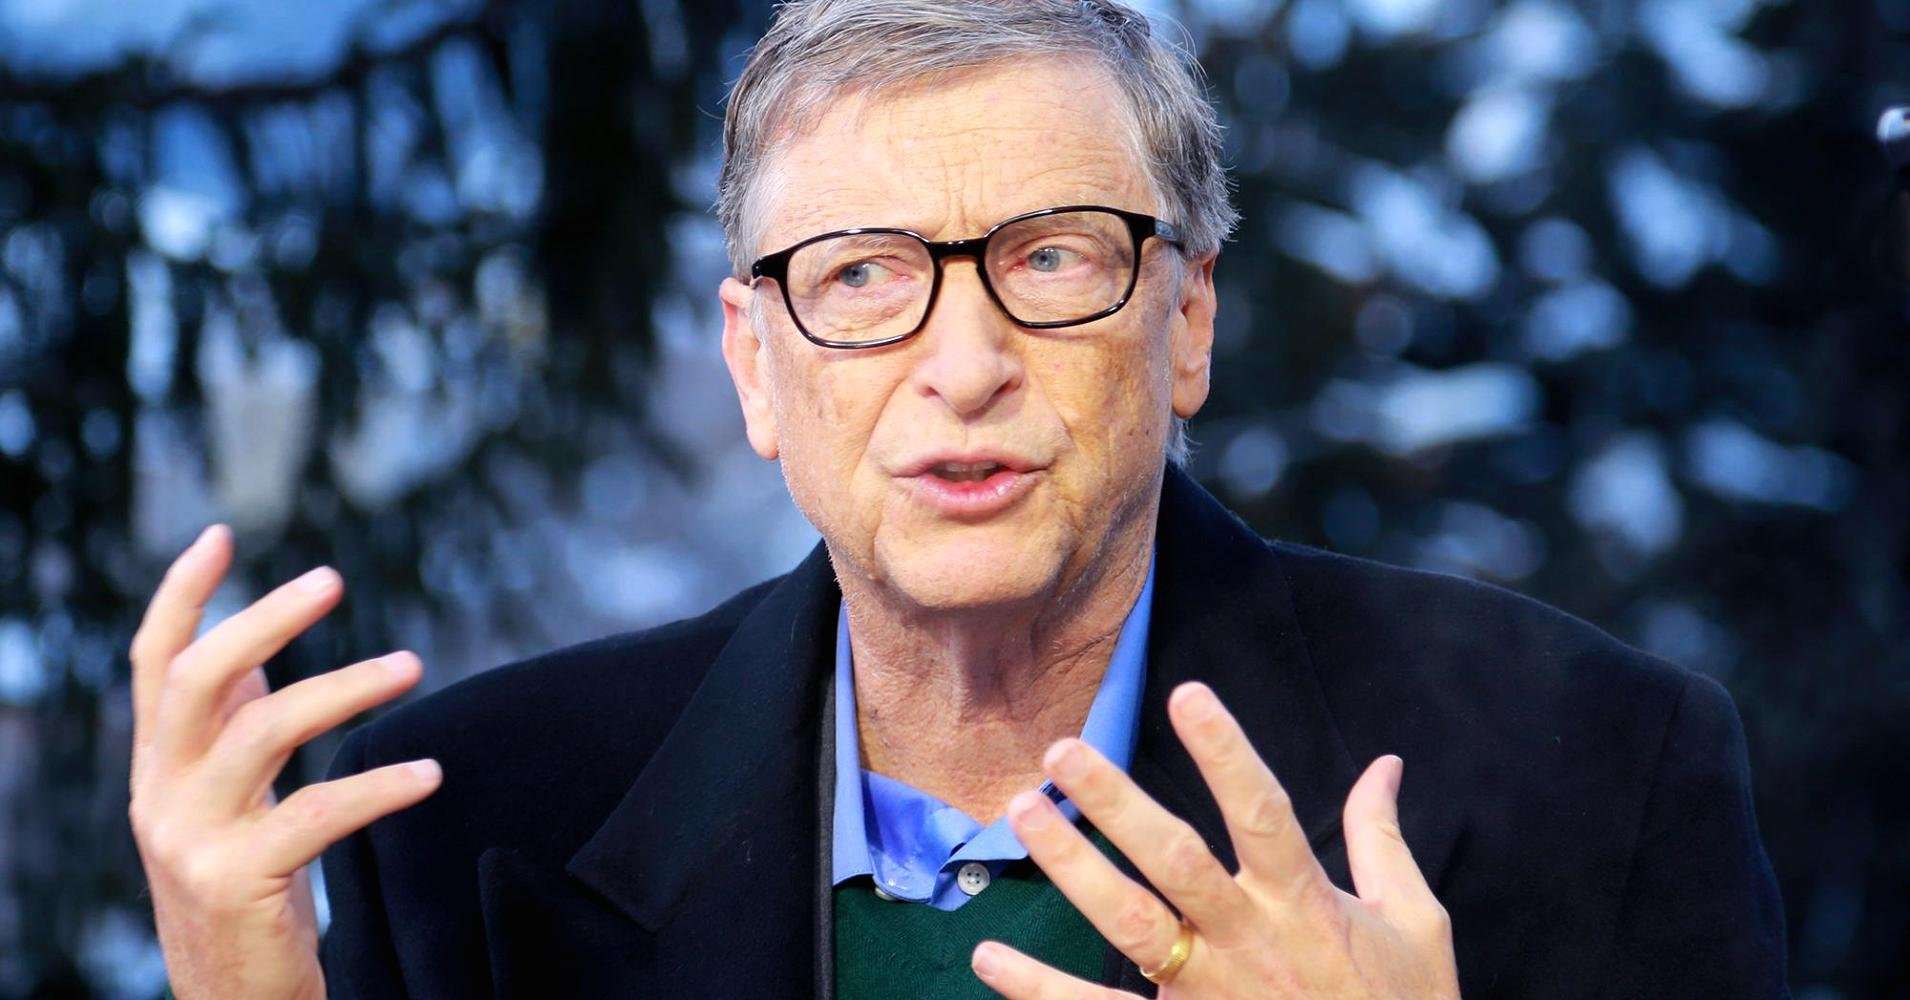 image for Bill Gates: It's 'scary to me' that technology can empower small groups to do great harm